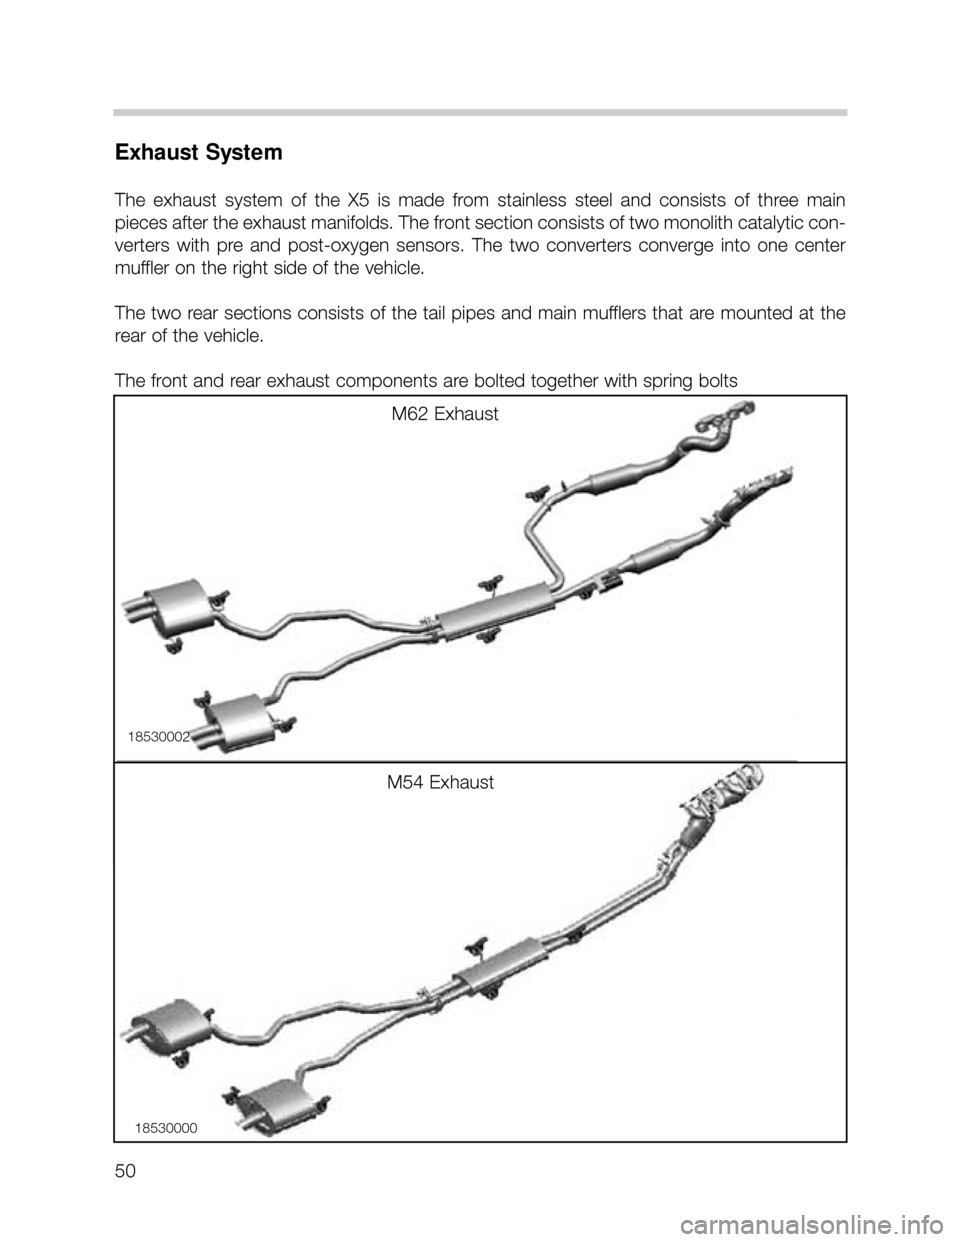 BMW X5 2004 E53 Service Manual 50
Exhaust System
The  exhaust  system  of  the  X5  is  made  from  stainless  steel  and  consists  of  three  main
pieces after the exhaust manifolds. The front section consists of two monolith cat